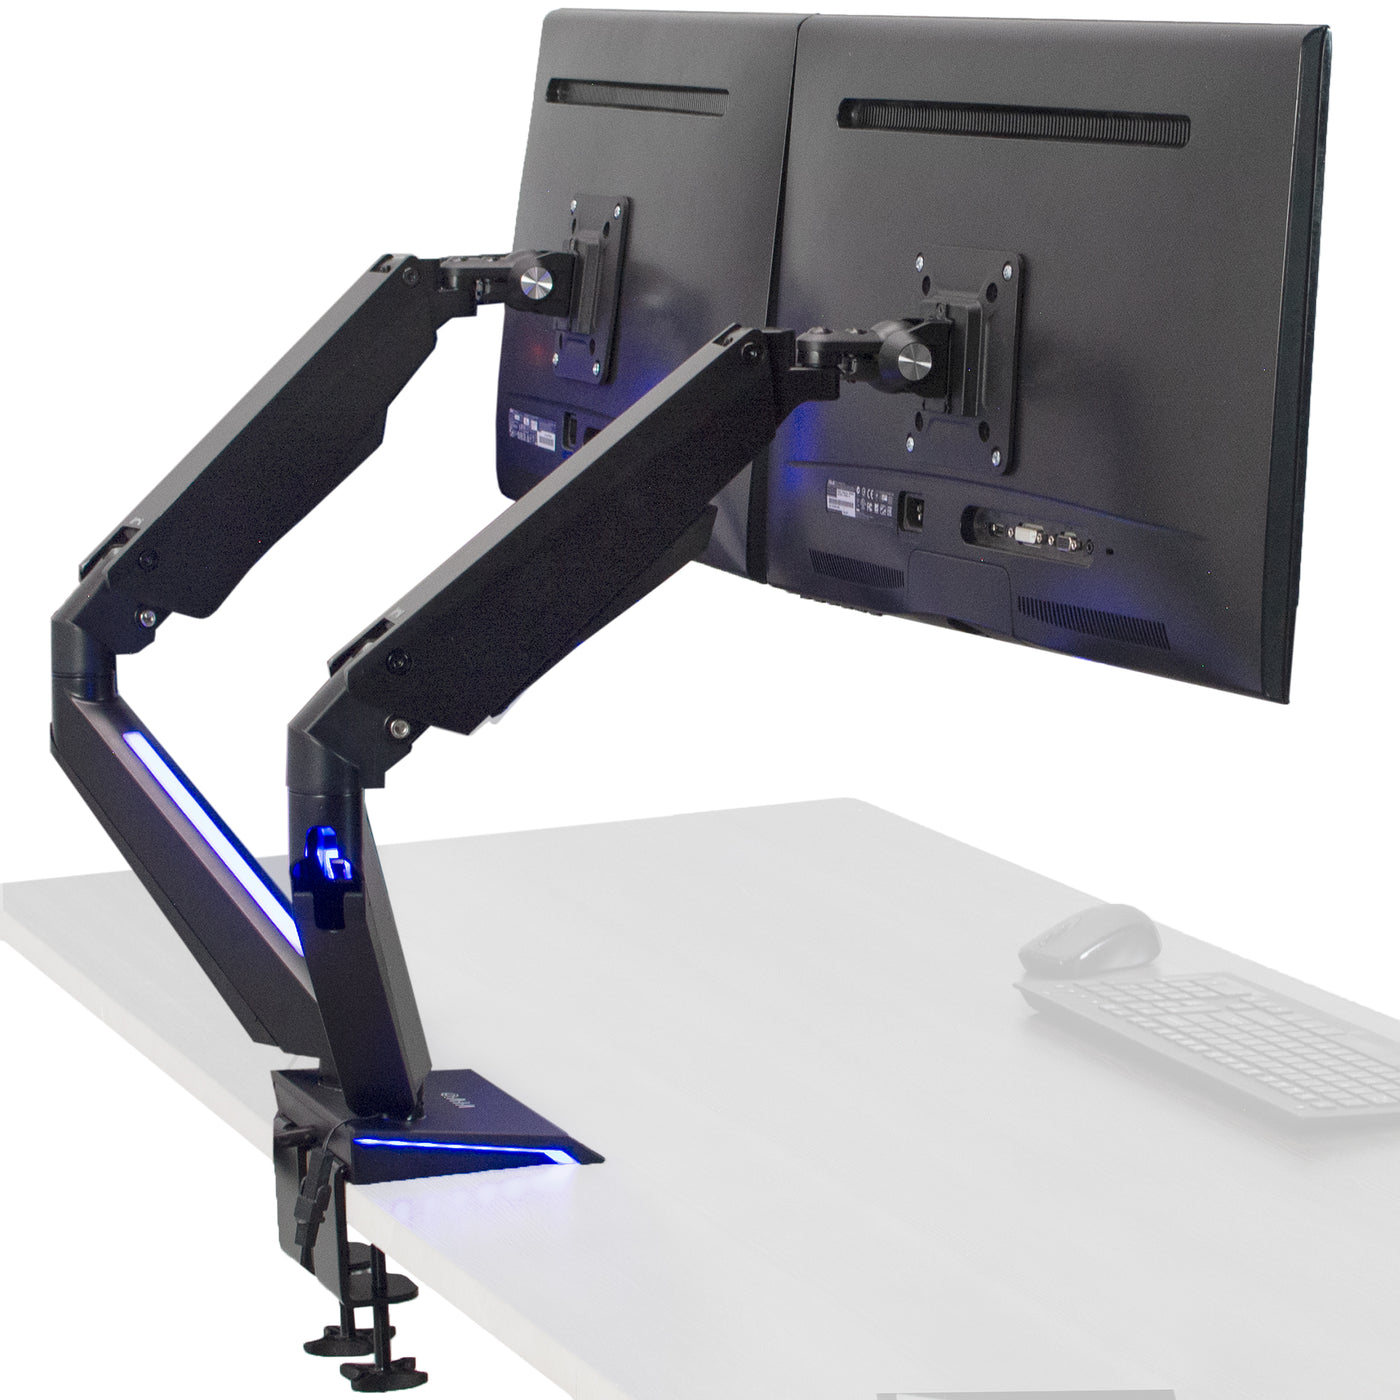 Dual Gaming Pneumatic Monitor Arms - Blue LED Lights